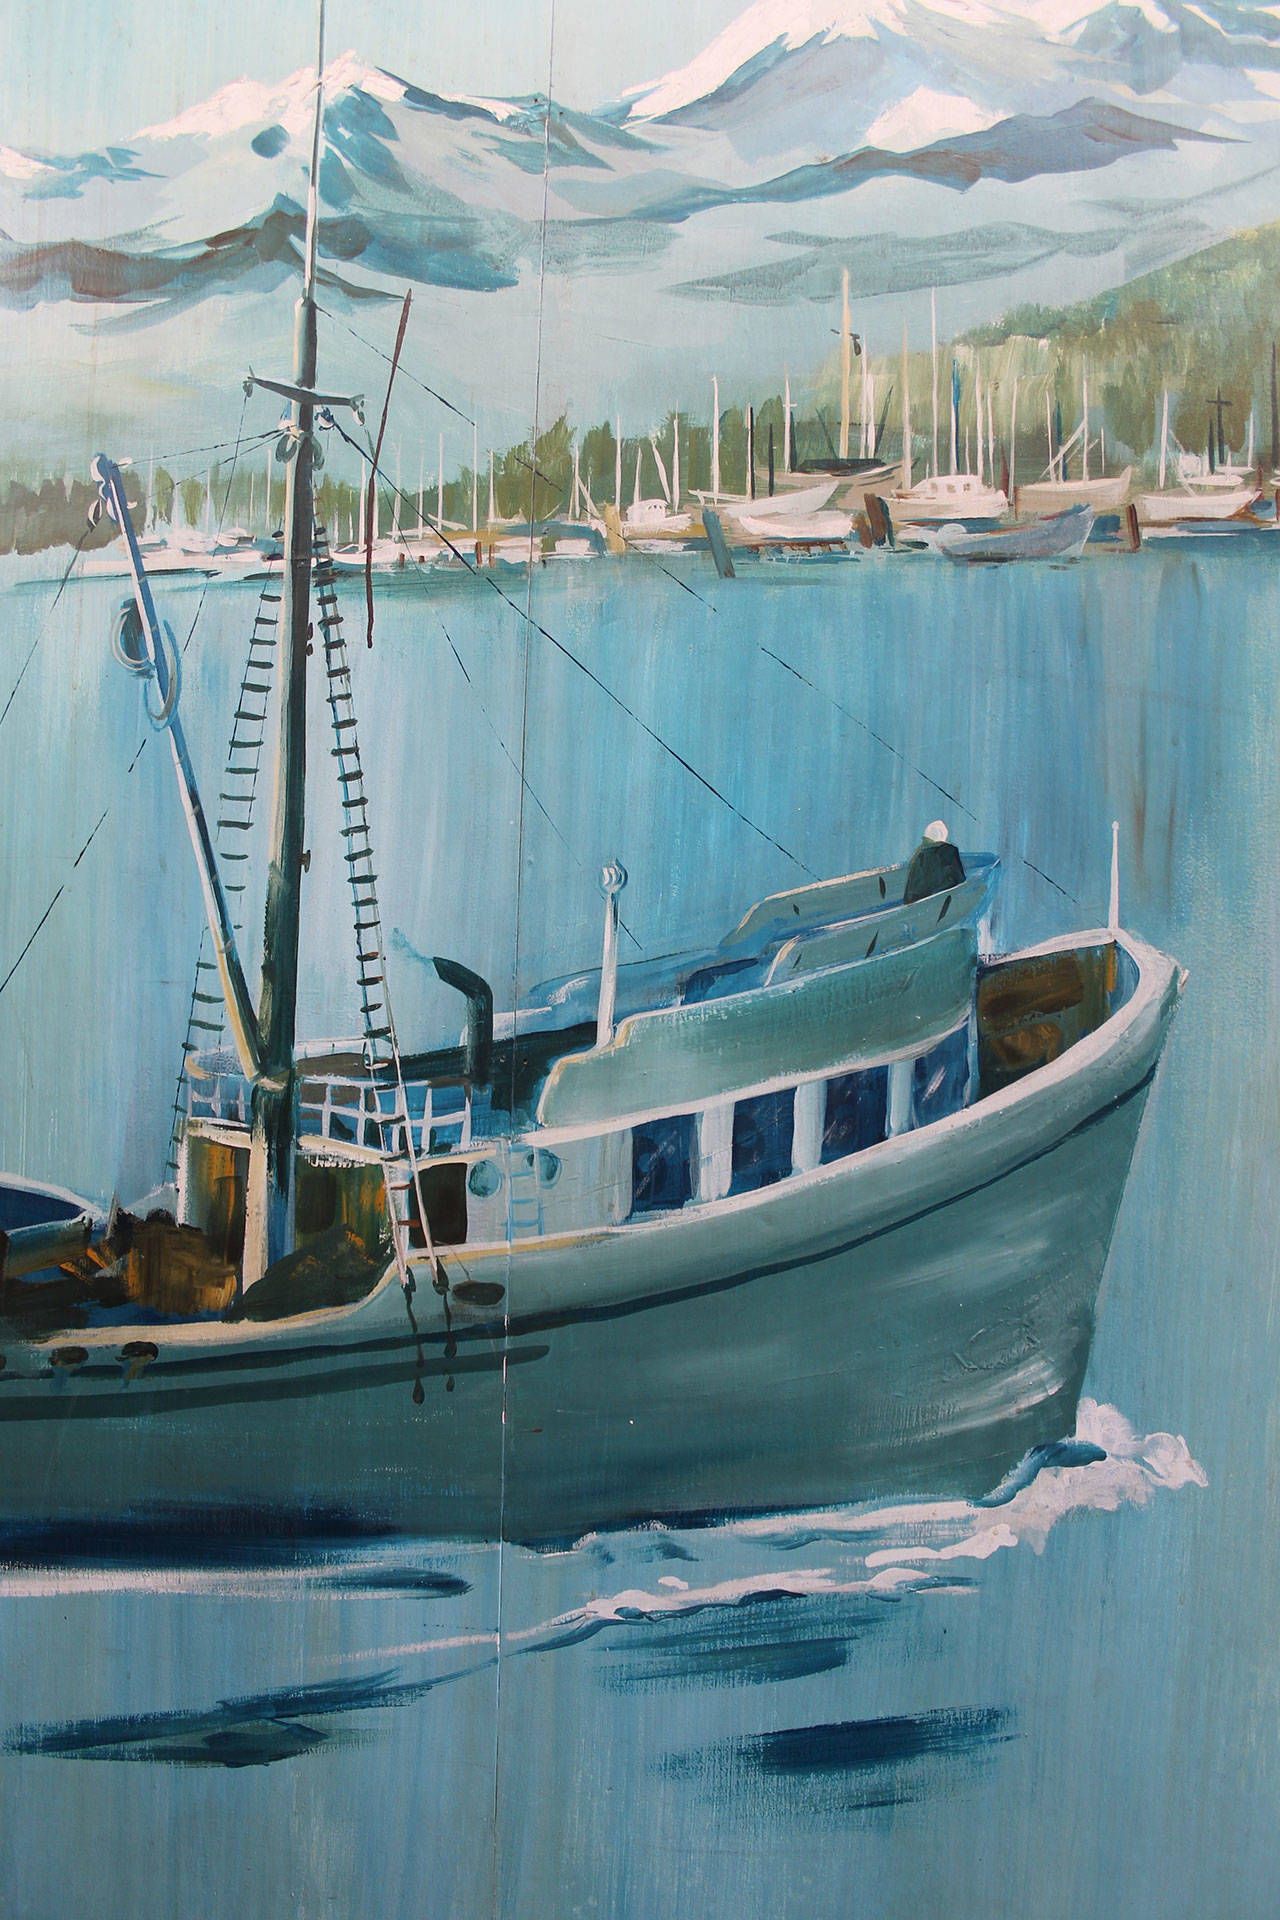 Another detail from the Poulsbo waterfront mural by Tizley’s. Ideally, the mural should be re-located to where it can be viewed from 15 or 20 feet away to fully appreciate the impressionistic style.                                Terryl Asla/Kitsap News Group